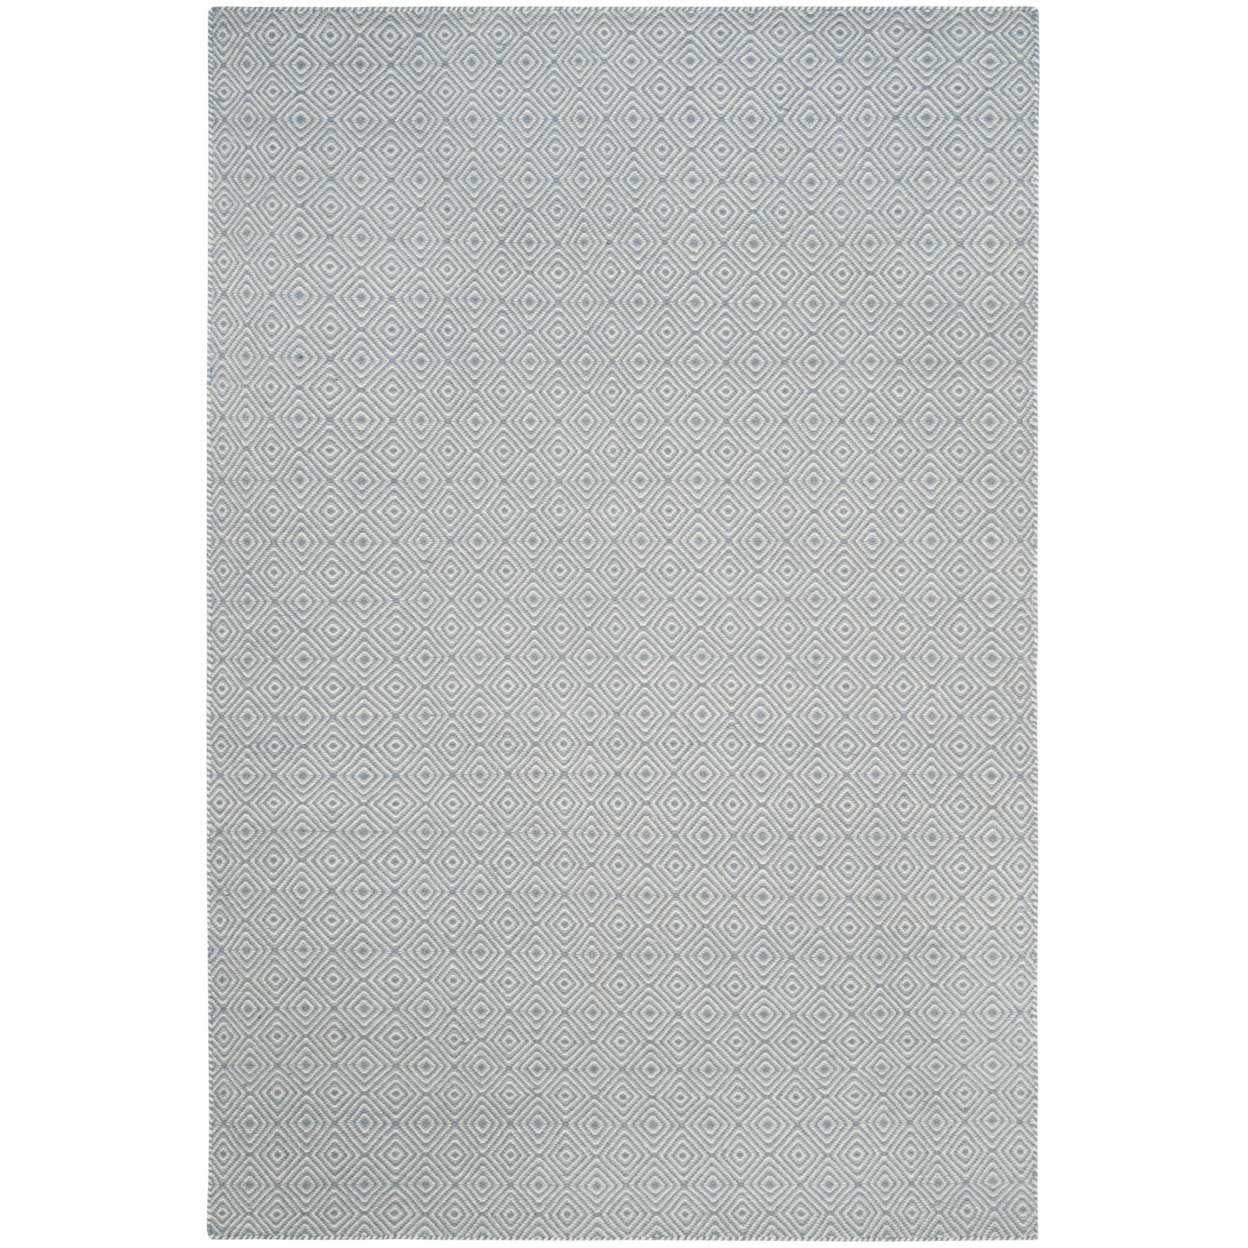 SAFAVIEH Oasis OAS525A Handwoven Silver / Ivory Rug - 8' X 10'